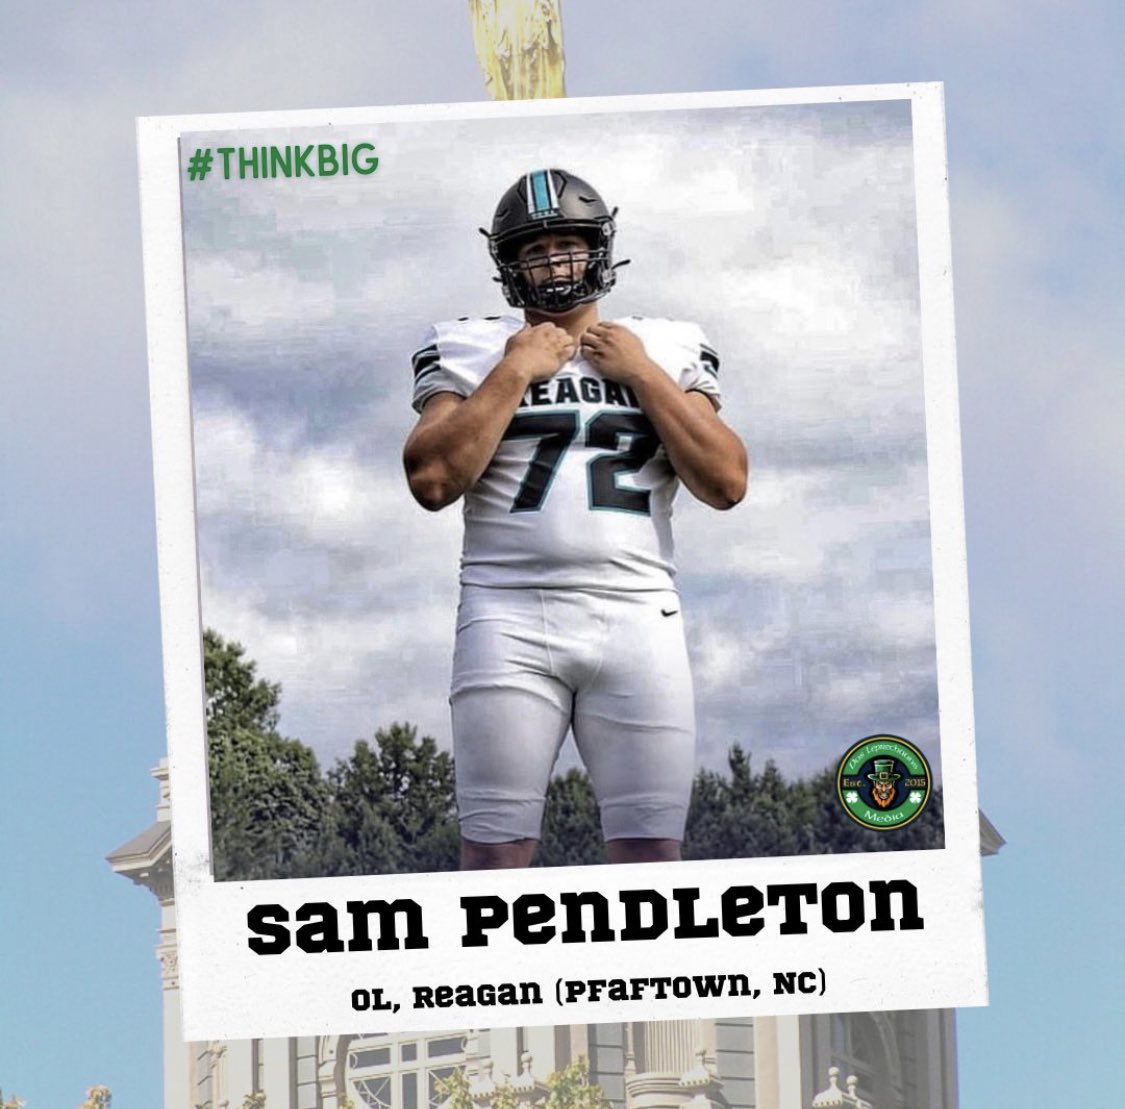 Sam Pendleton made it official this morning on #NSD23 and is now part of the #IrishFamily! #GoIrish #ThinkBIG